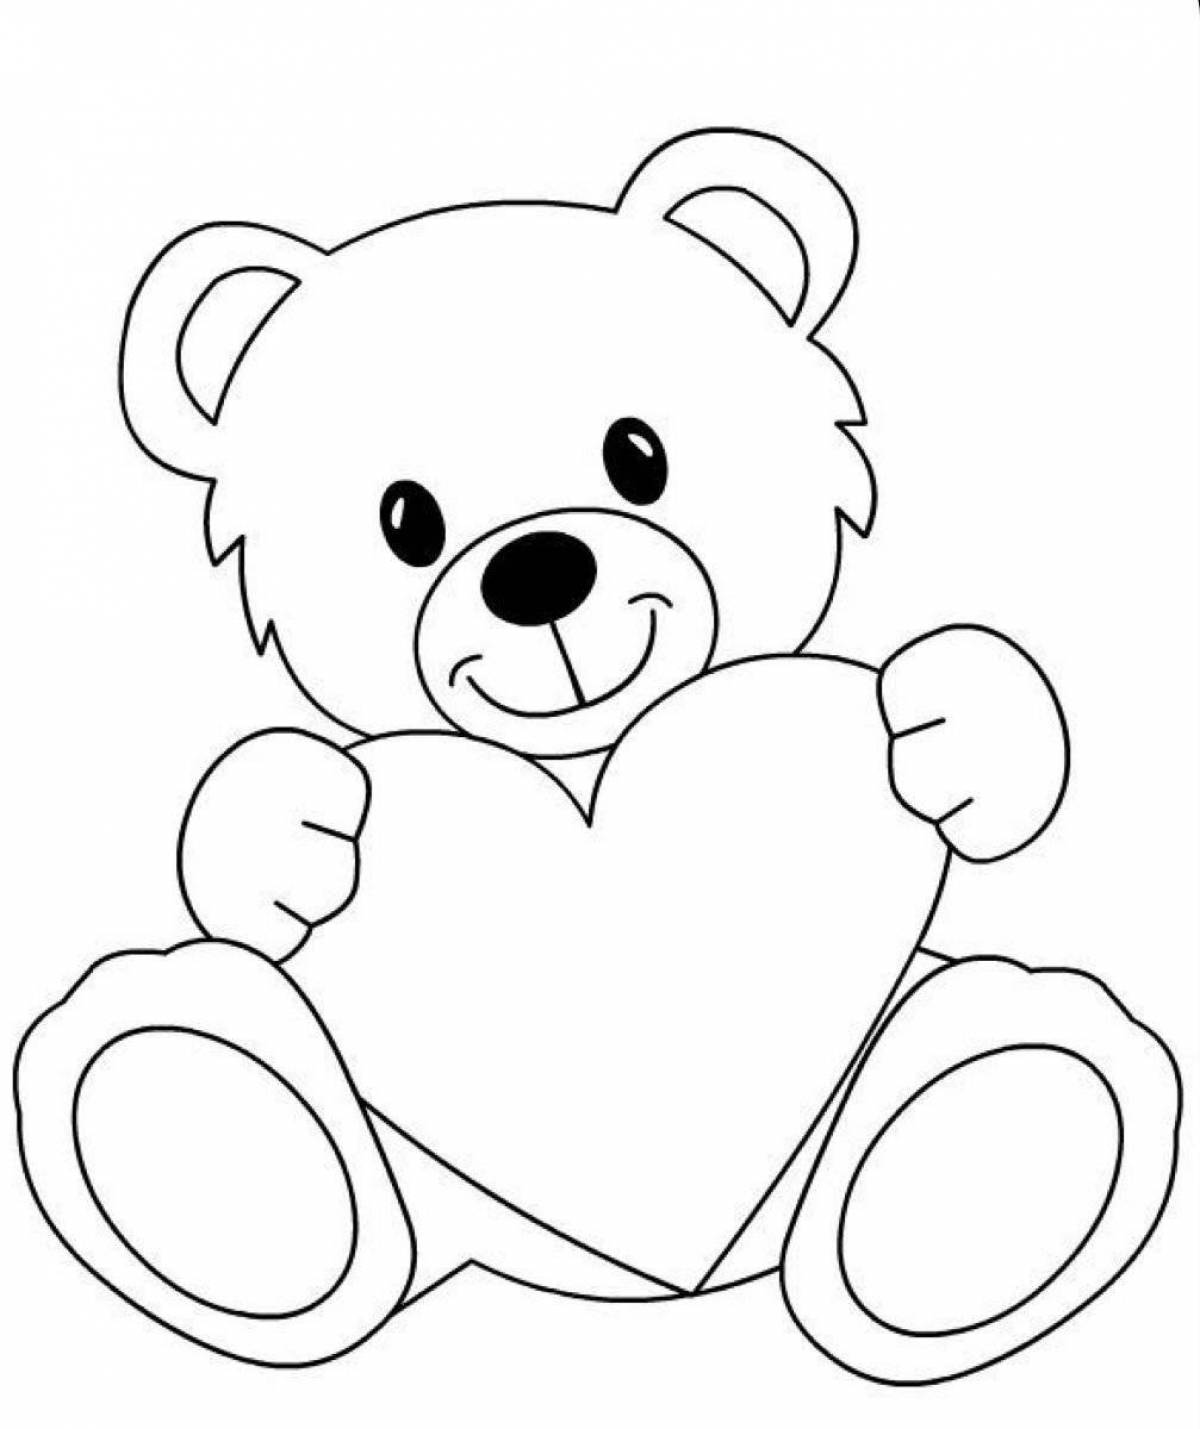 Coloring page witty teddy bear with a heart